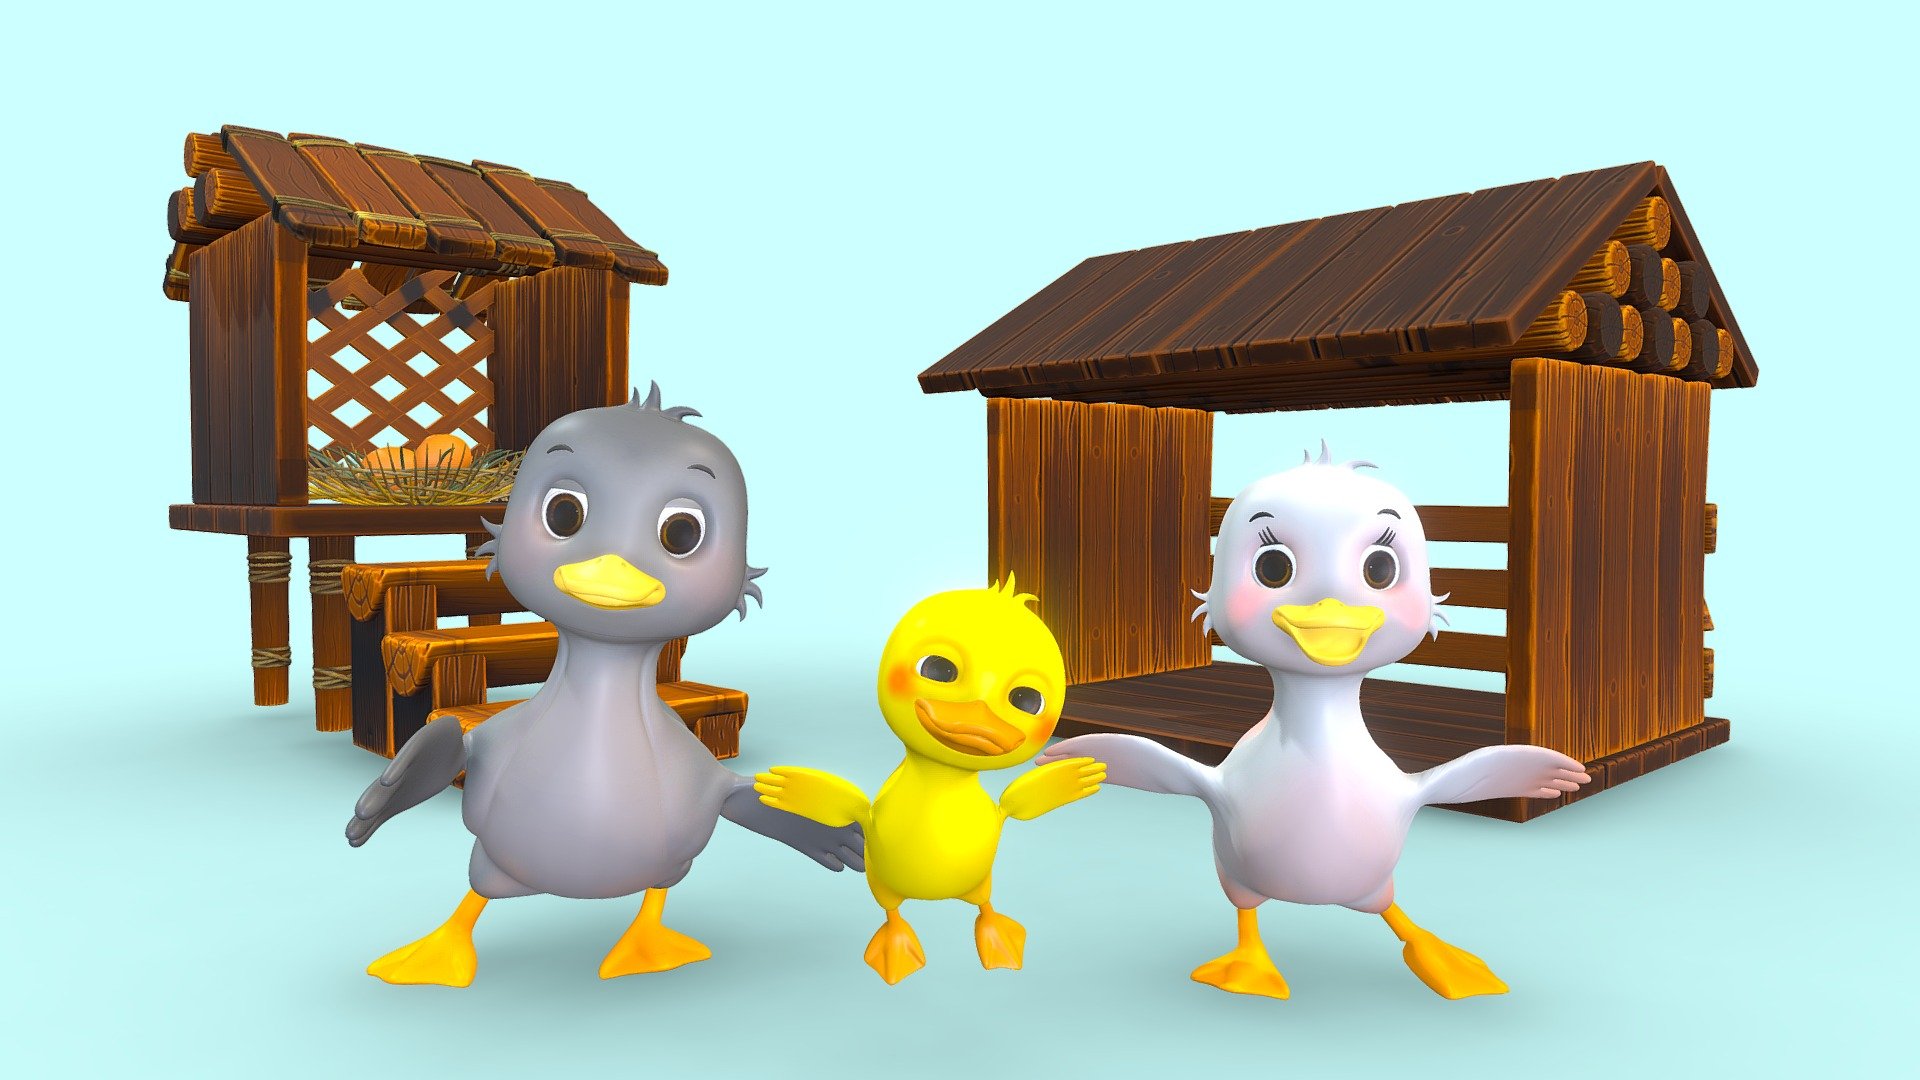 The cartoon duck family includes baby duck, Mumma duck, and daddy duck. Used different probs for ducks. Also included a duck house, nest, and eggs.

The model is packed with high resolution pbr textures, ready to be used in modern games or rhymes. Additional custom sail poses or higher resolution textures available on demand, reach out to me for more information on that 3d model